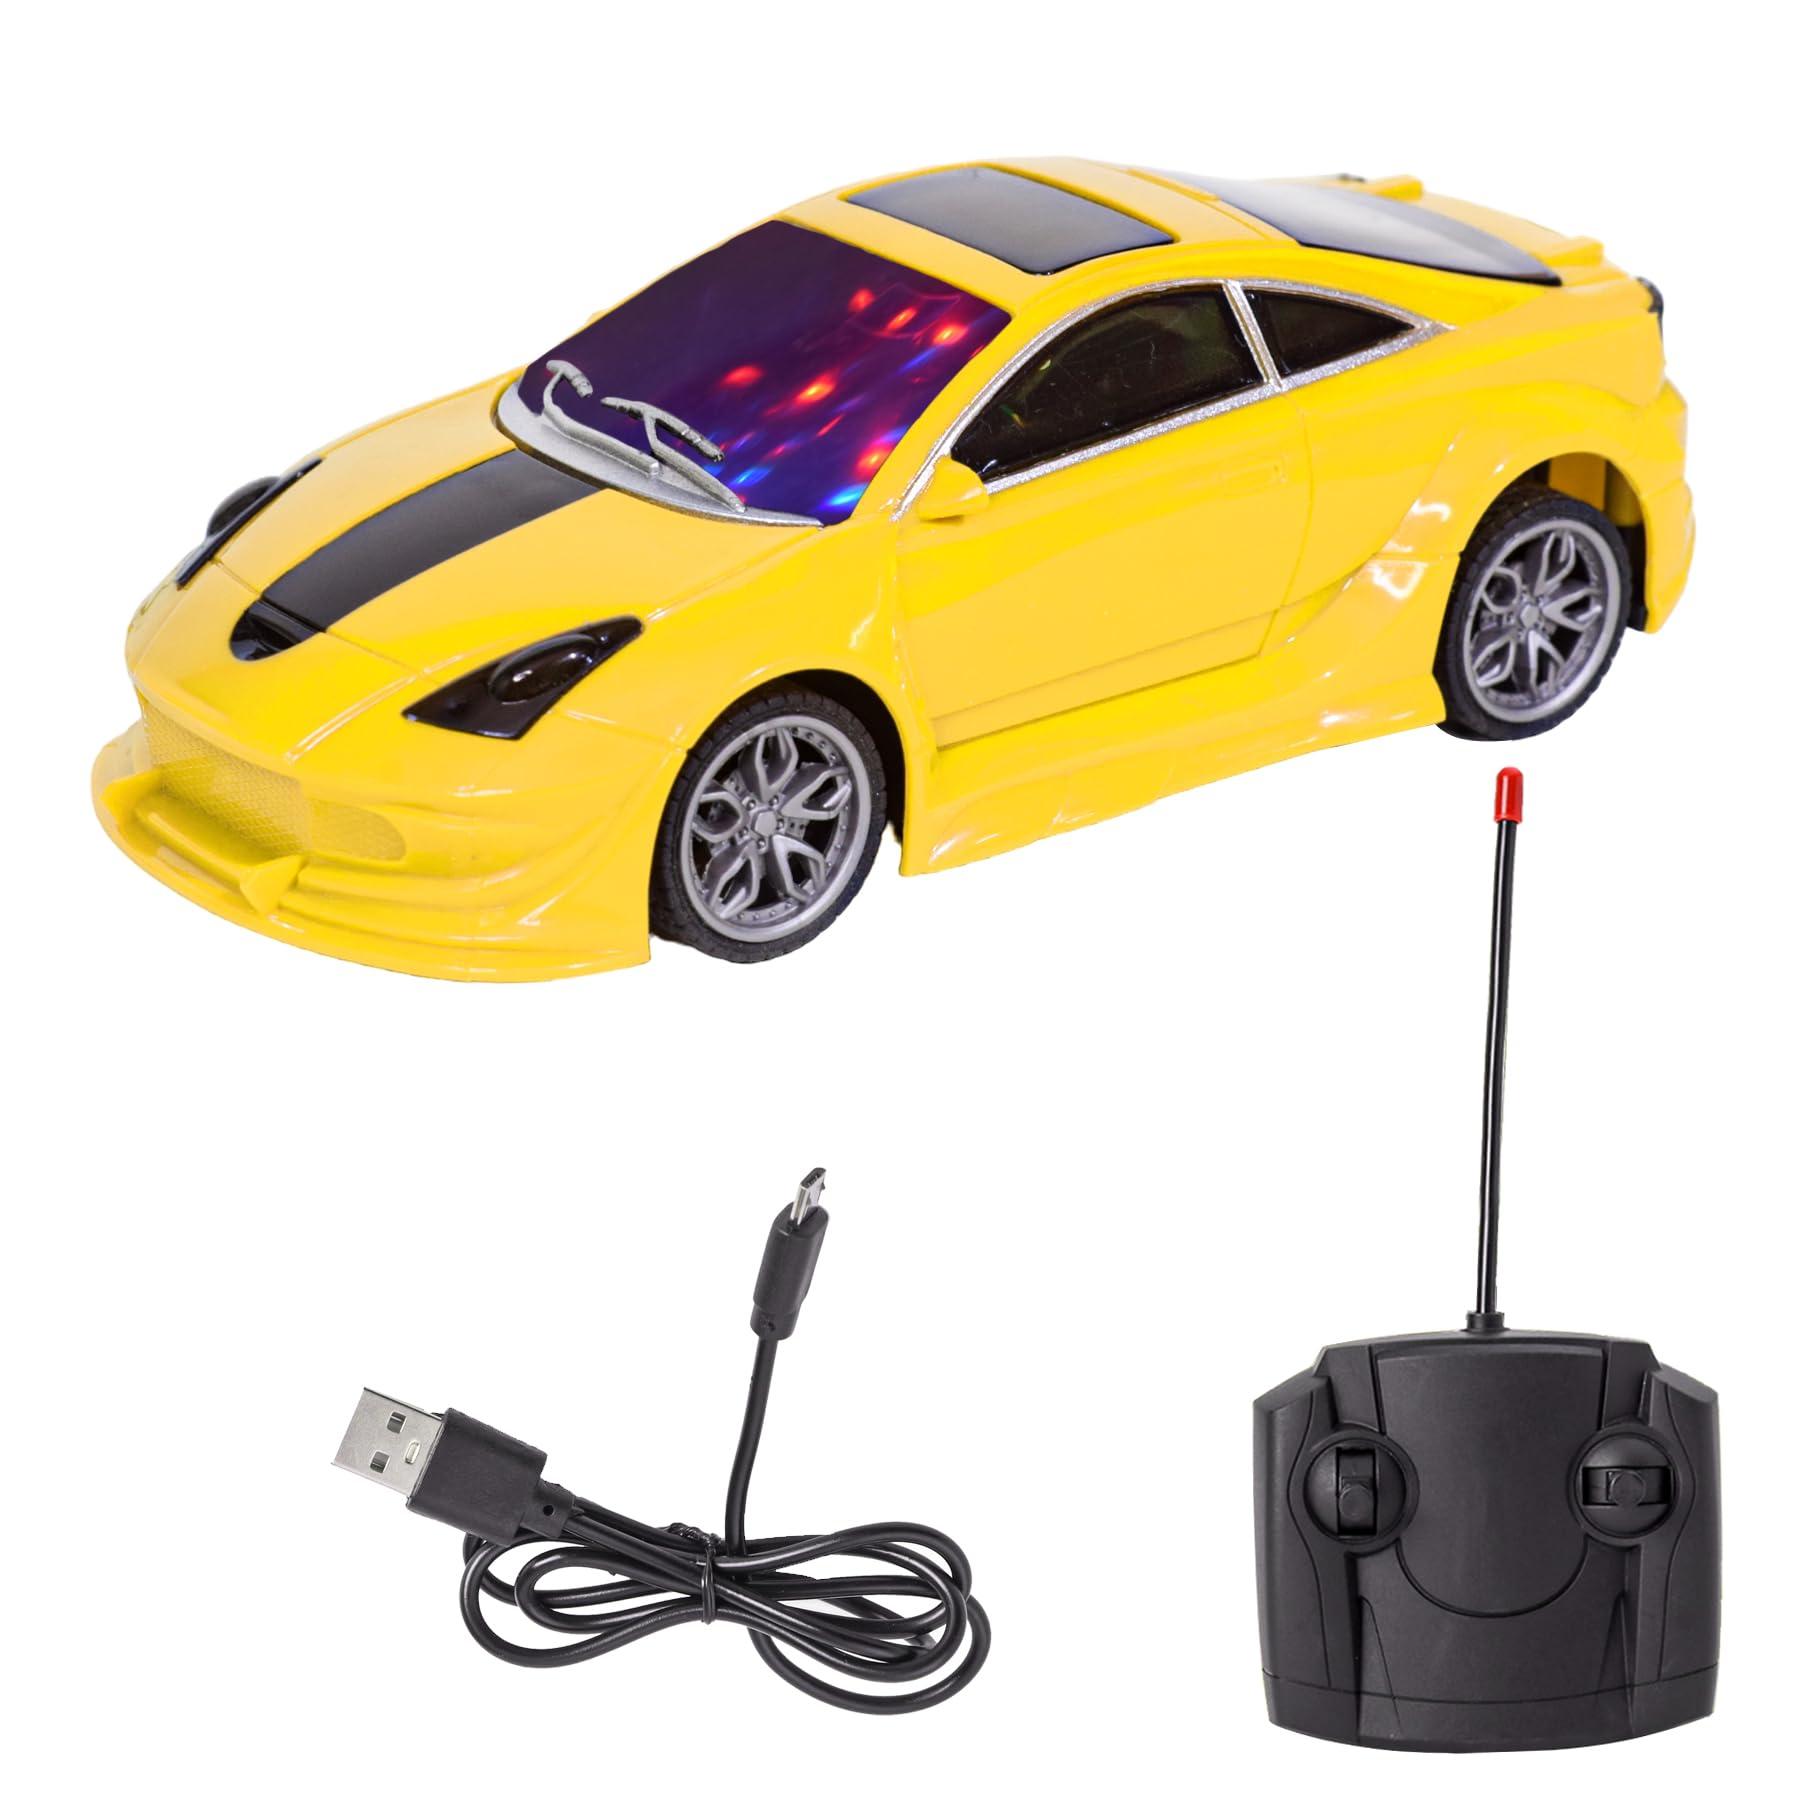 Wishkey Remote Control Car: Benefits and Buying Guide for Wishkey Remote Control Car